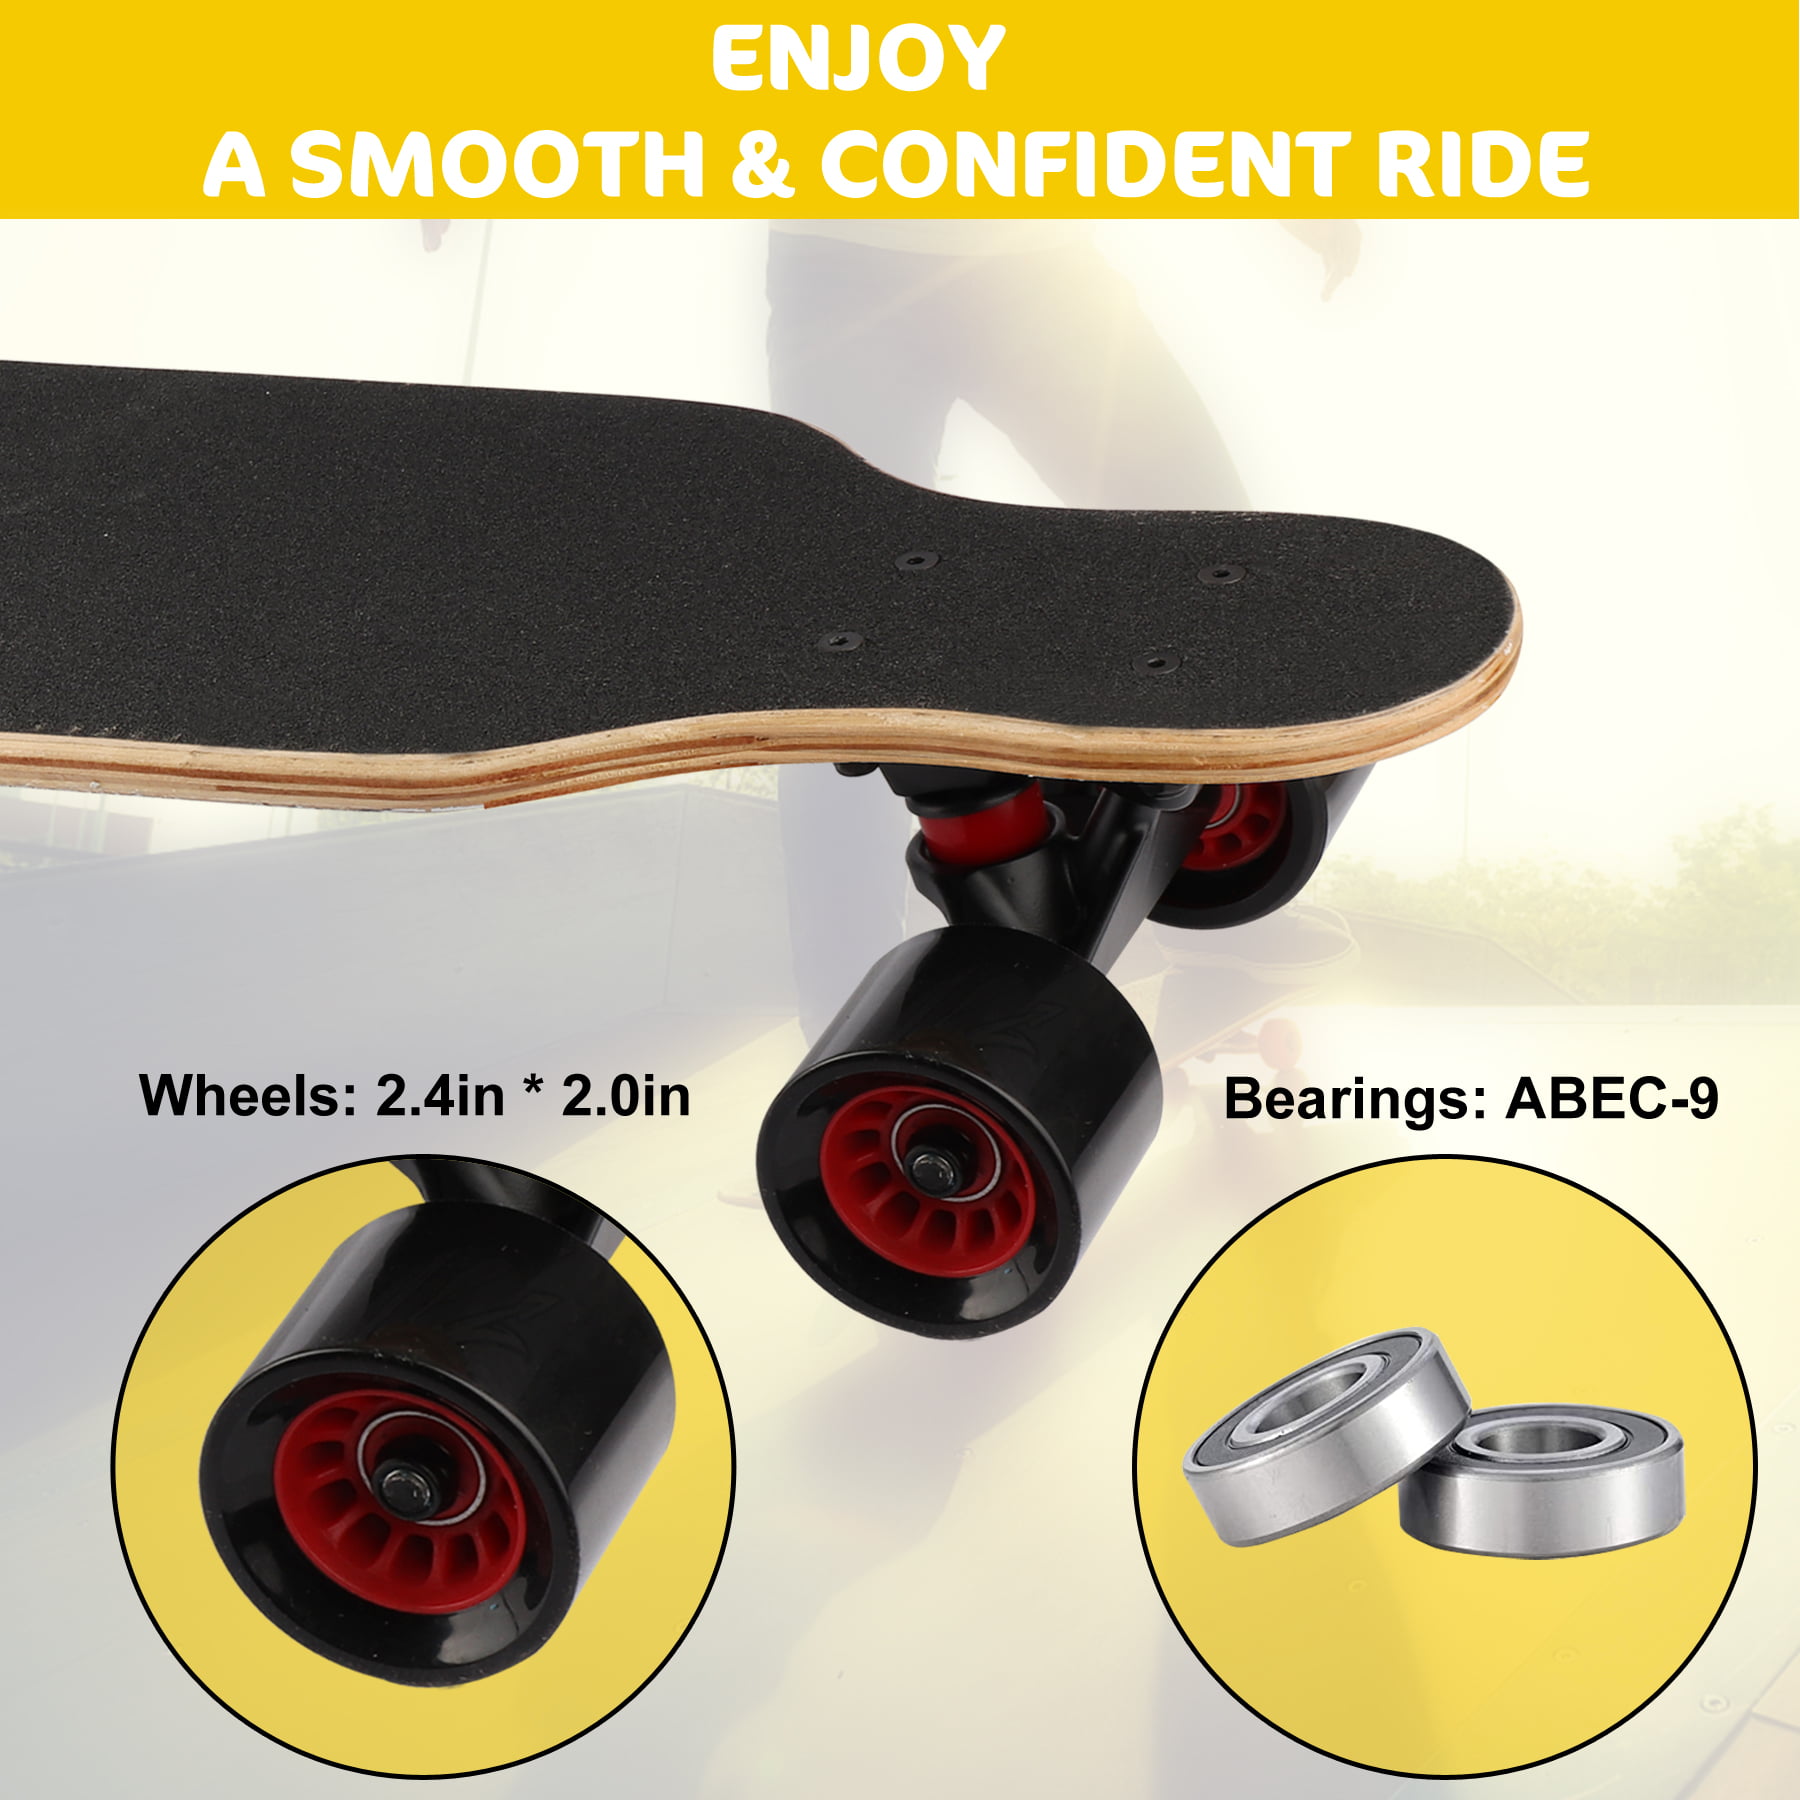 Longboard Skateboard Complete - 31 Inch Pro Small for Hybrid, Freestyle, Carving, Cruising and Downhill with All-in-one T-Tool -